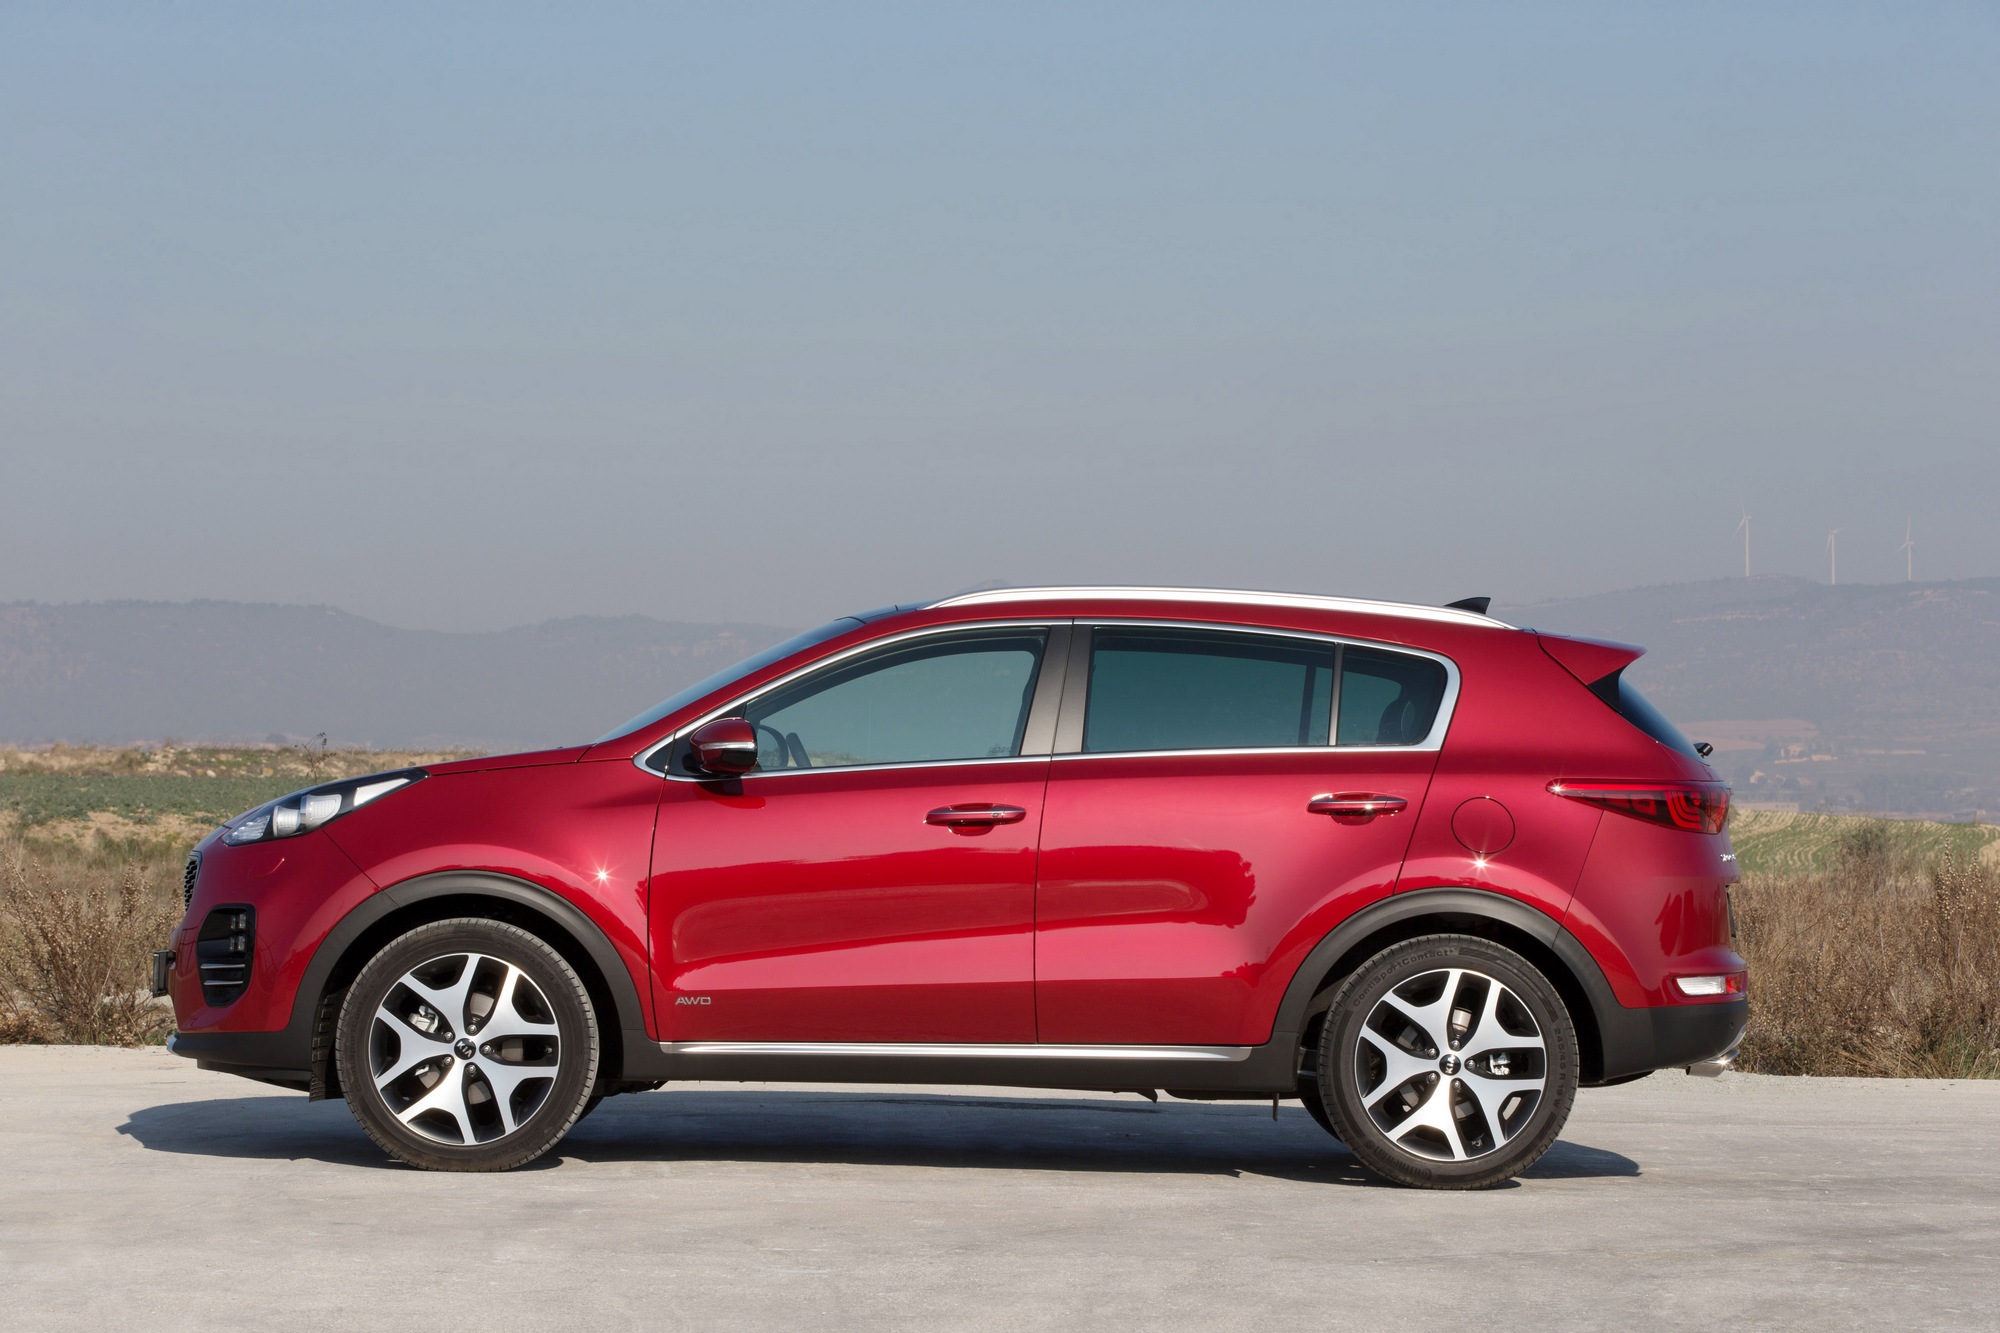 Kia Sportage: Comprehensive Guide to Technical Specifications